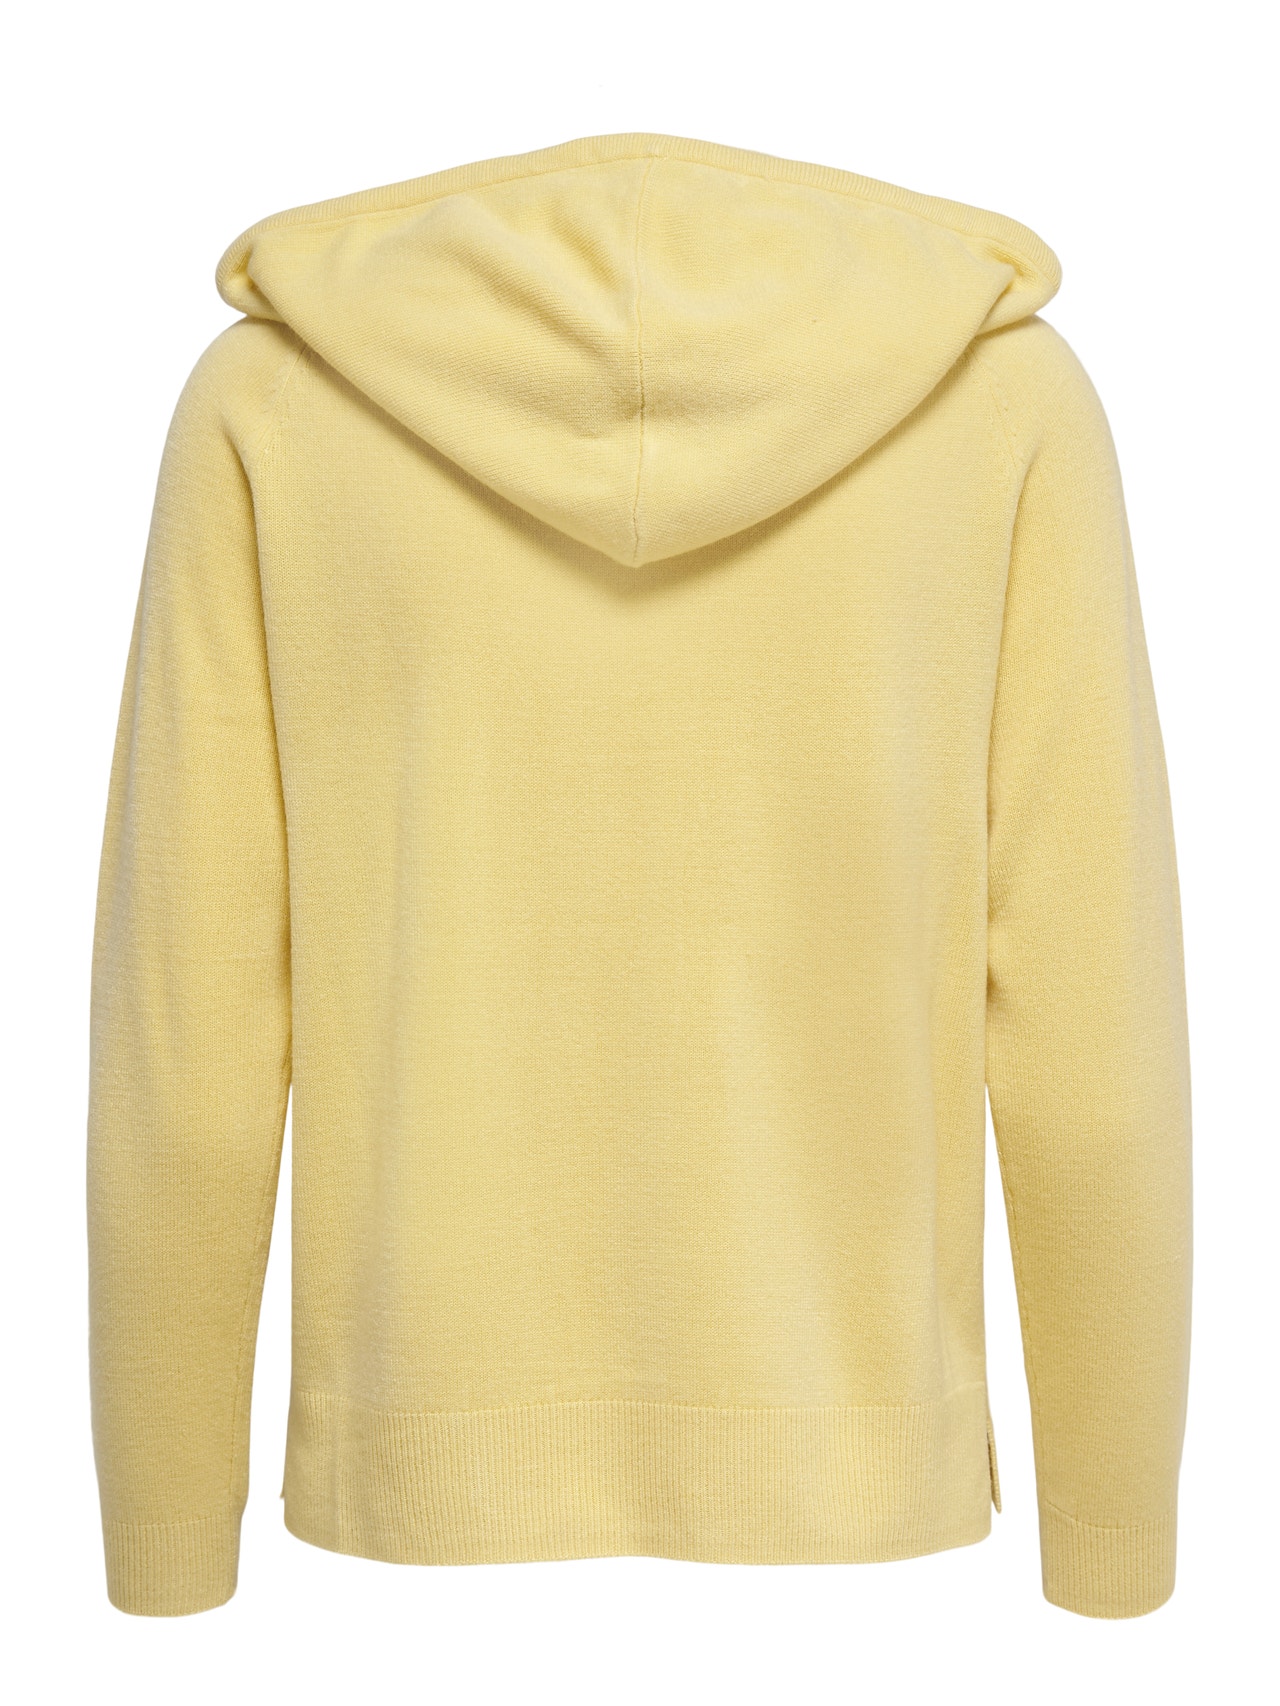 ONLY O-hals Pullover -Straw - 15246204